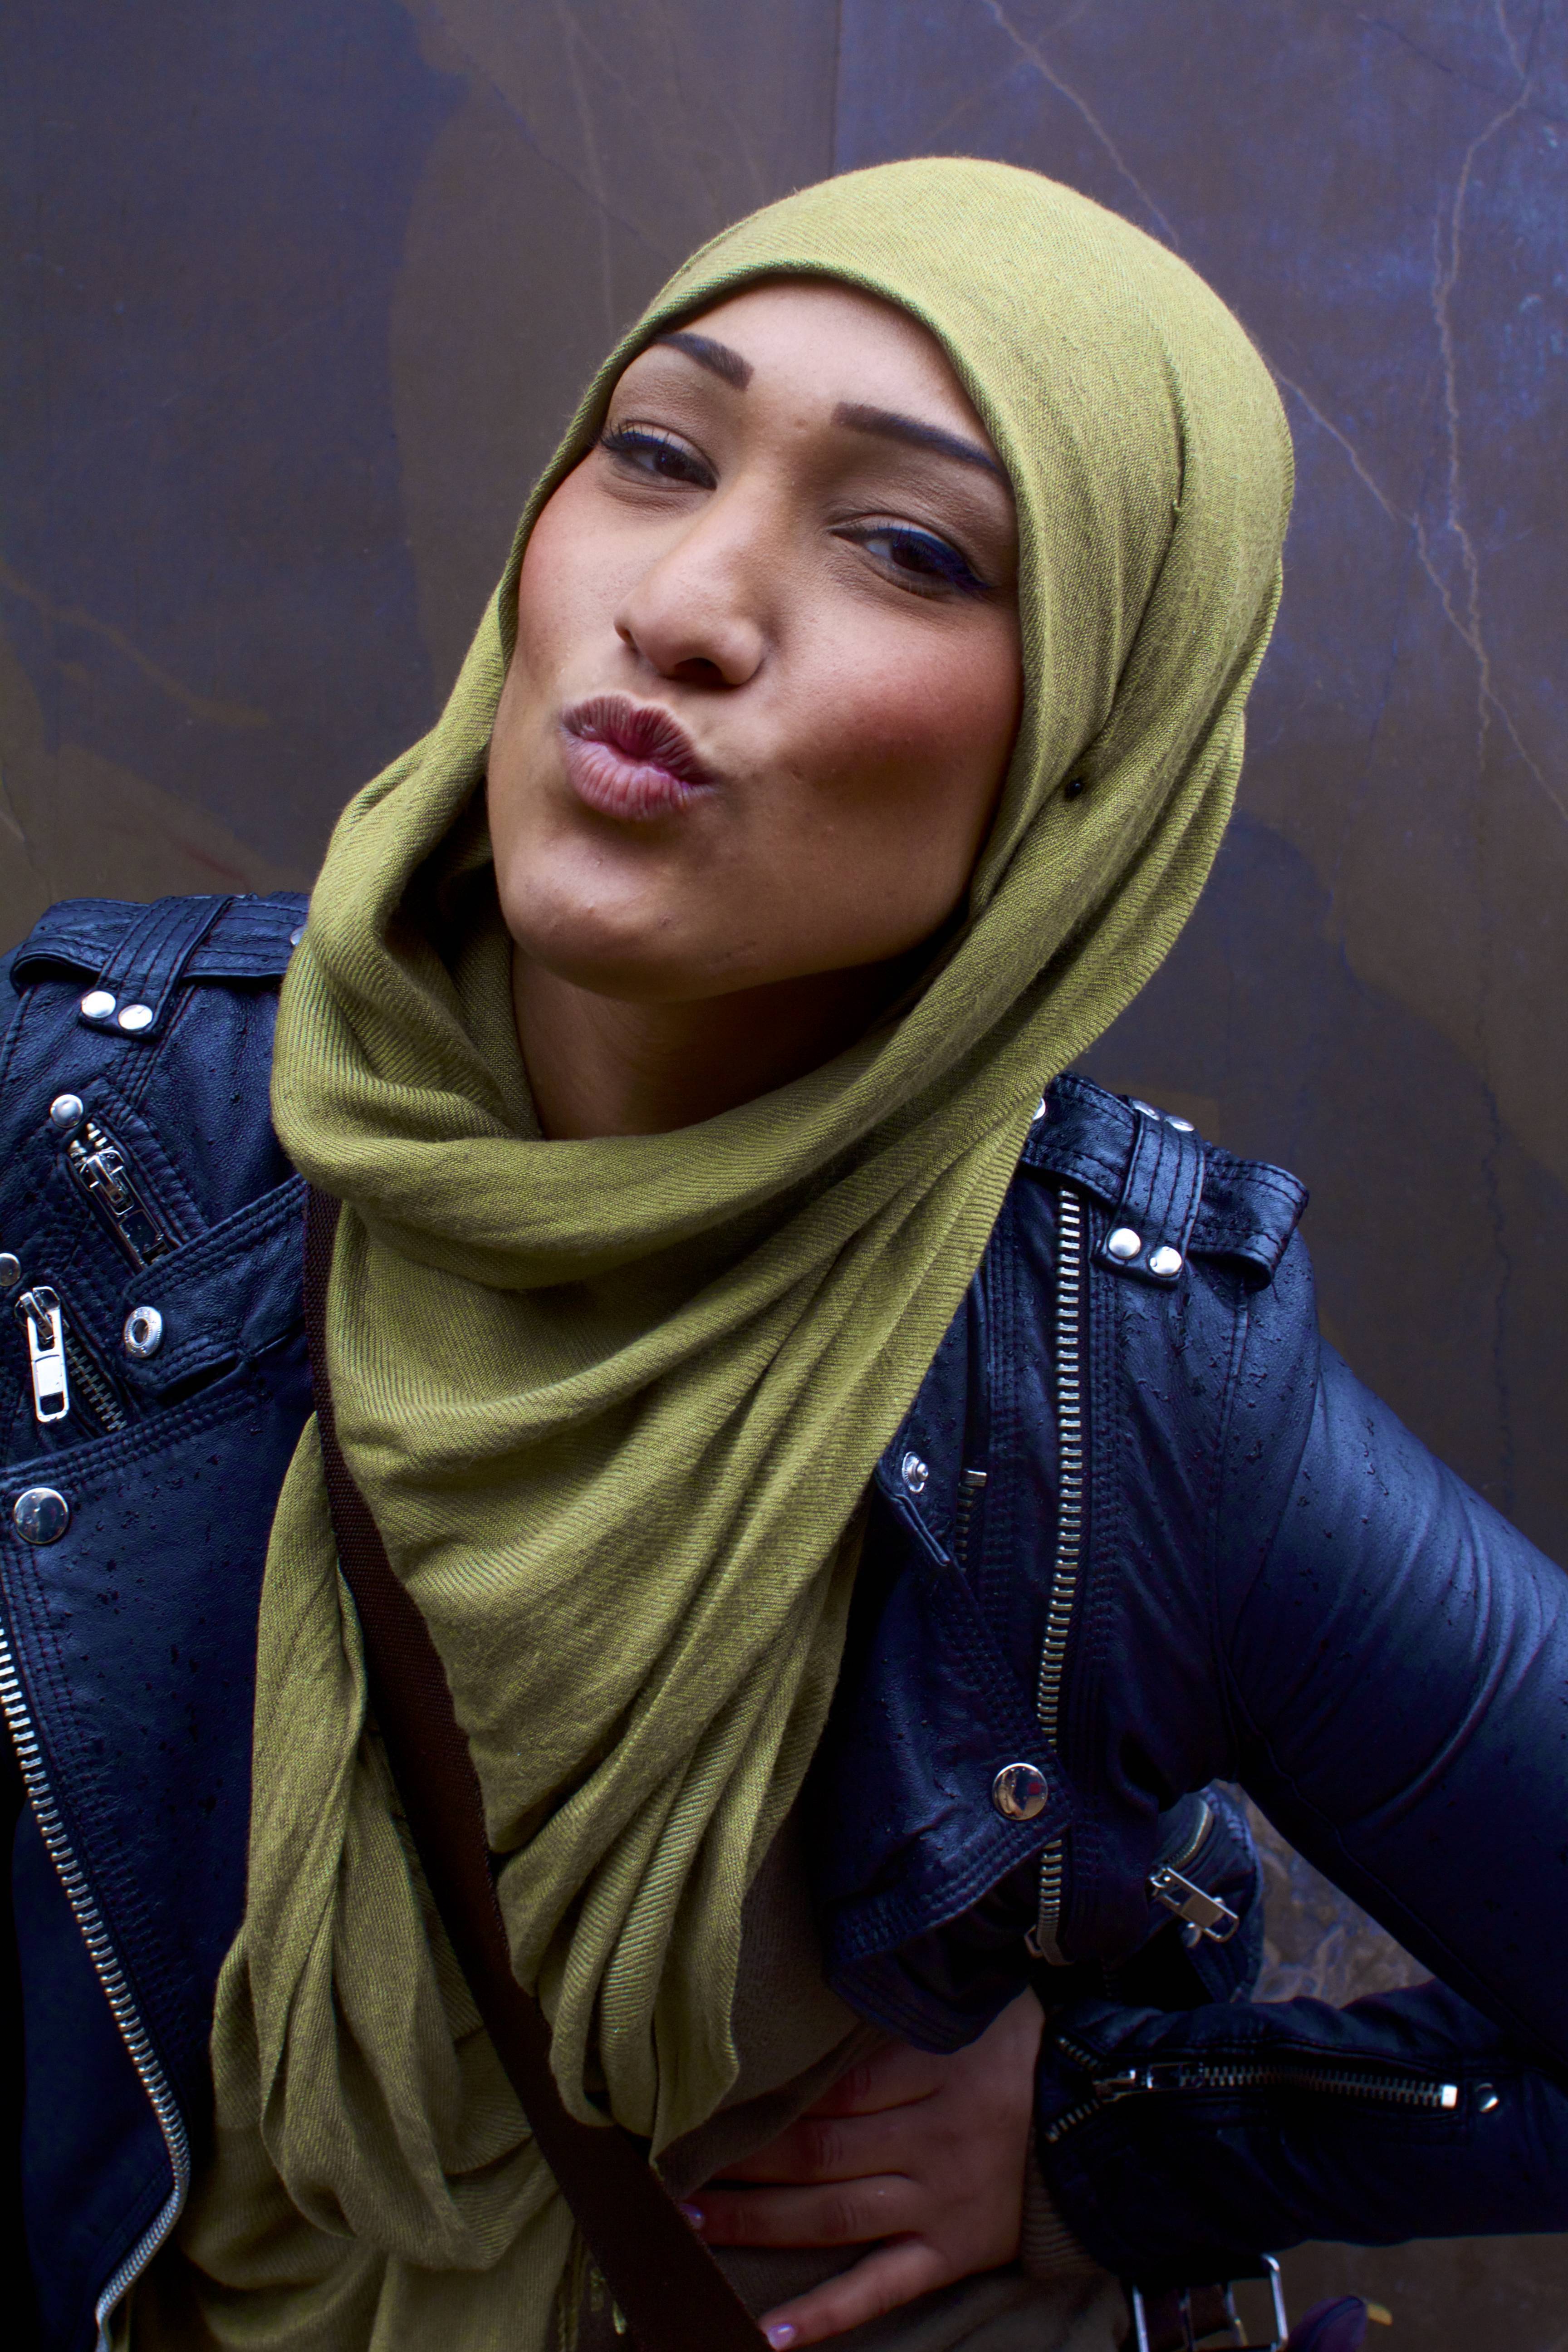 what to expect when dating a muslim woman